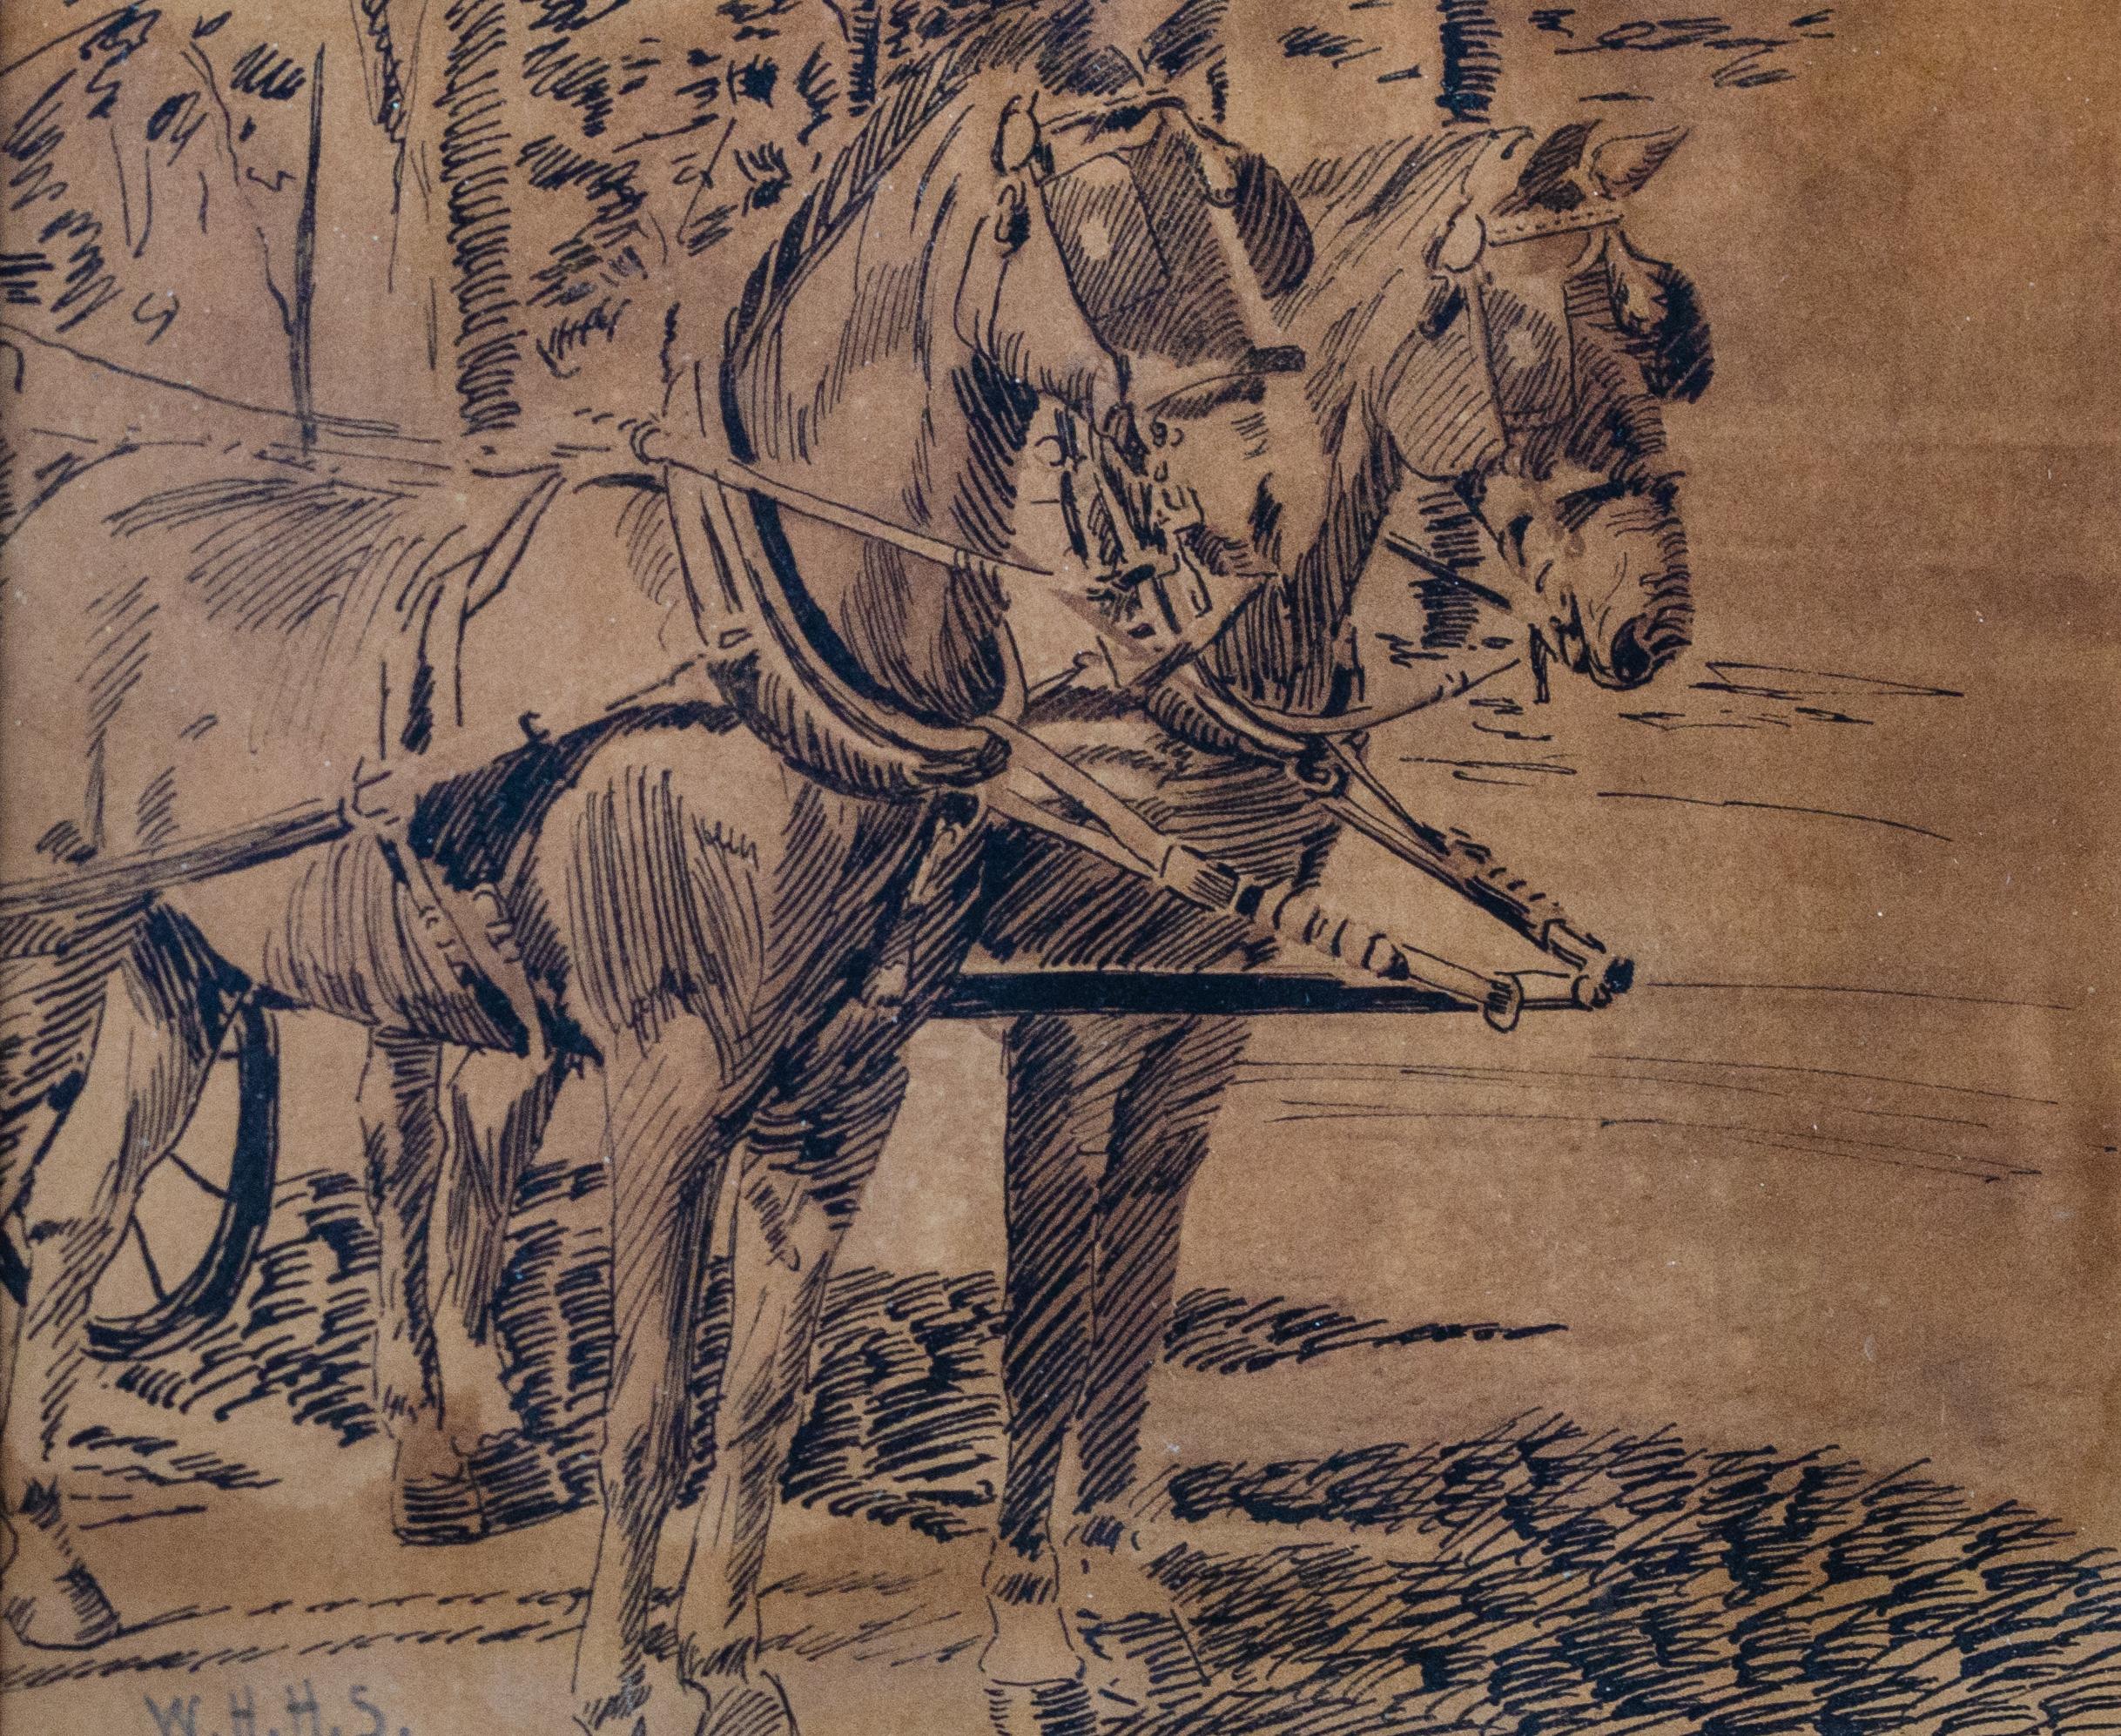 American Ink Drawing of Two Work Horses - Art by Unknown